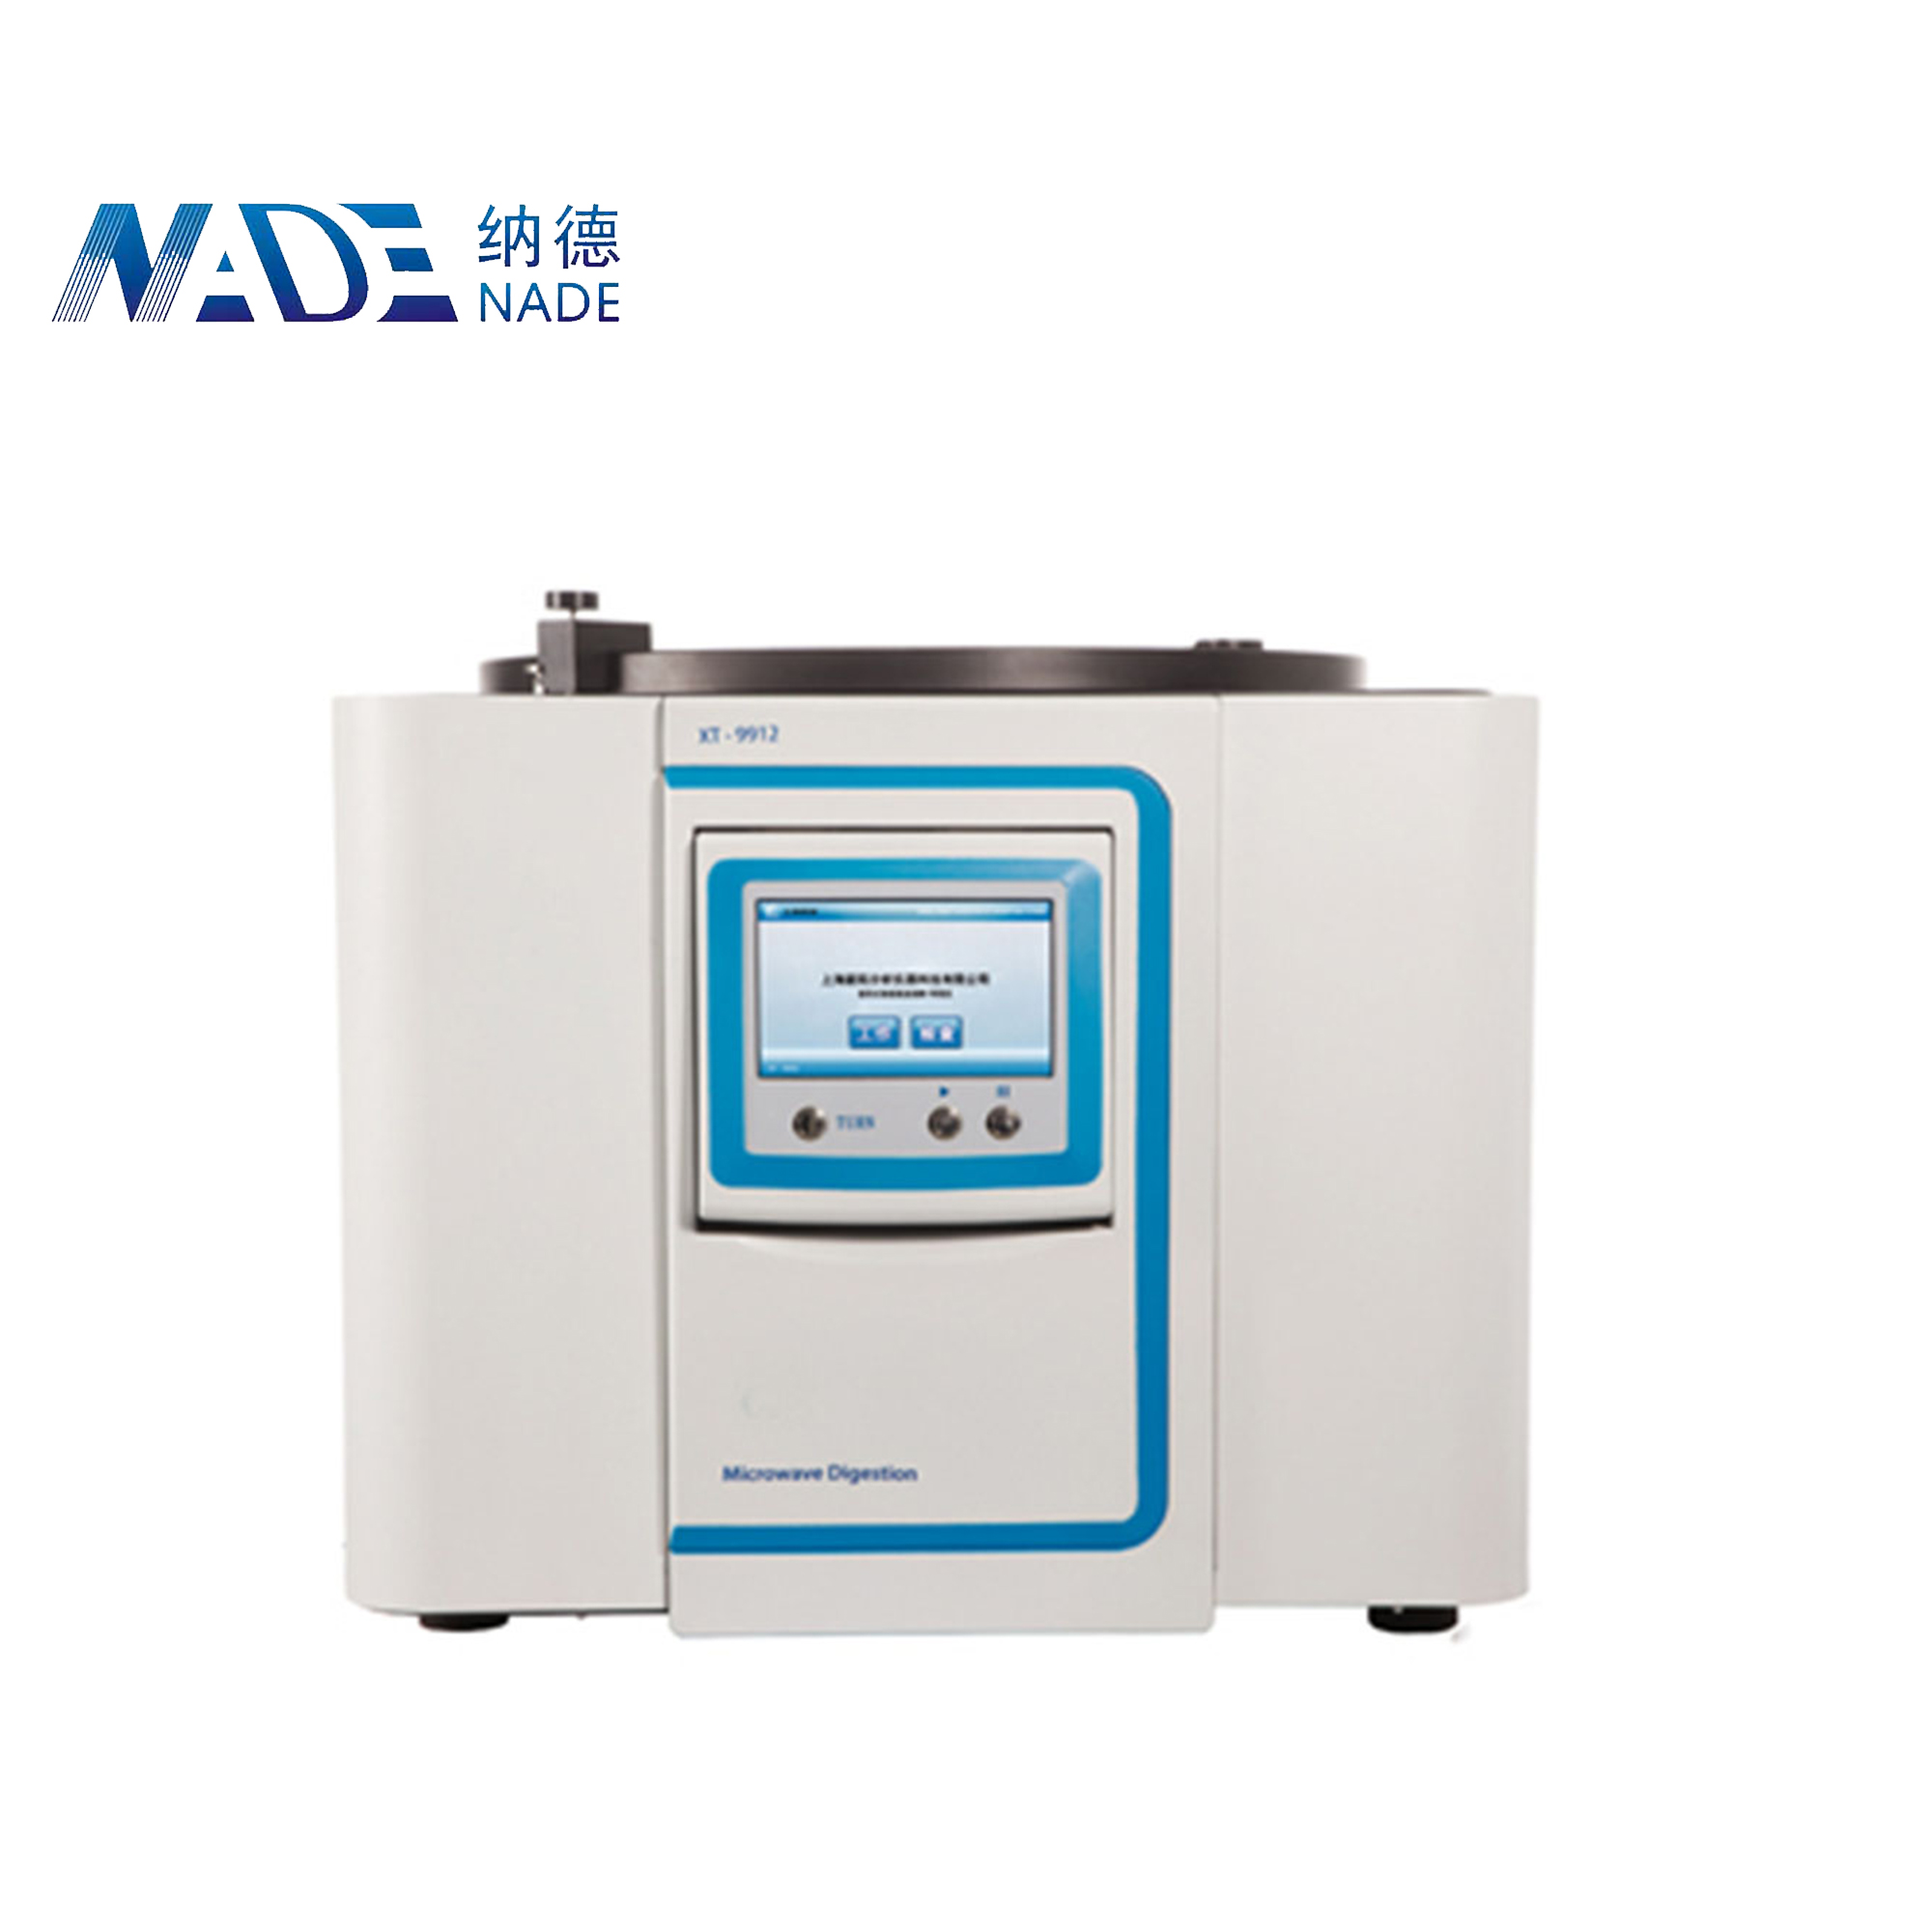 Nade Lab Chemical & Pharmaceutical Machinery XT-9912 Intelligent Microwave Digestion System